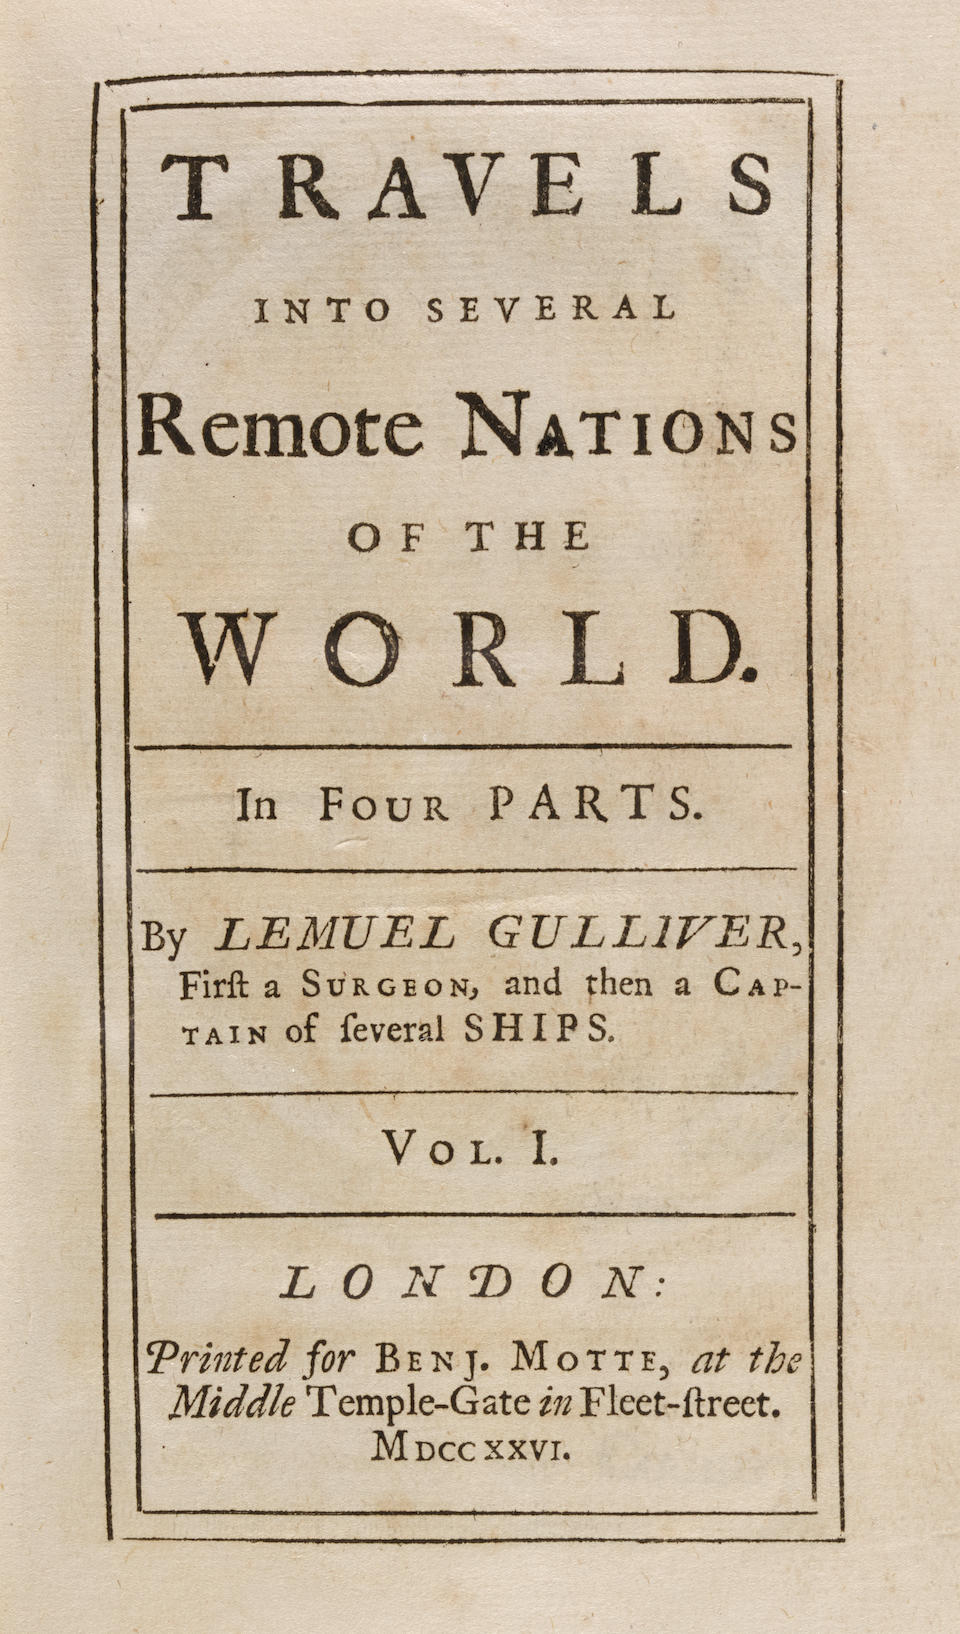 AN EXTRAORDINARILY FINE COPY OF GULLIVER'S TRAVELS. SWIFT, JONATHAN. 1667-1745. Travels into Several Remote Nations of the World ... by Lemuel Gulliver. London: Printed for Benj. Motte, 1726.